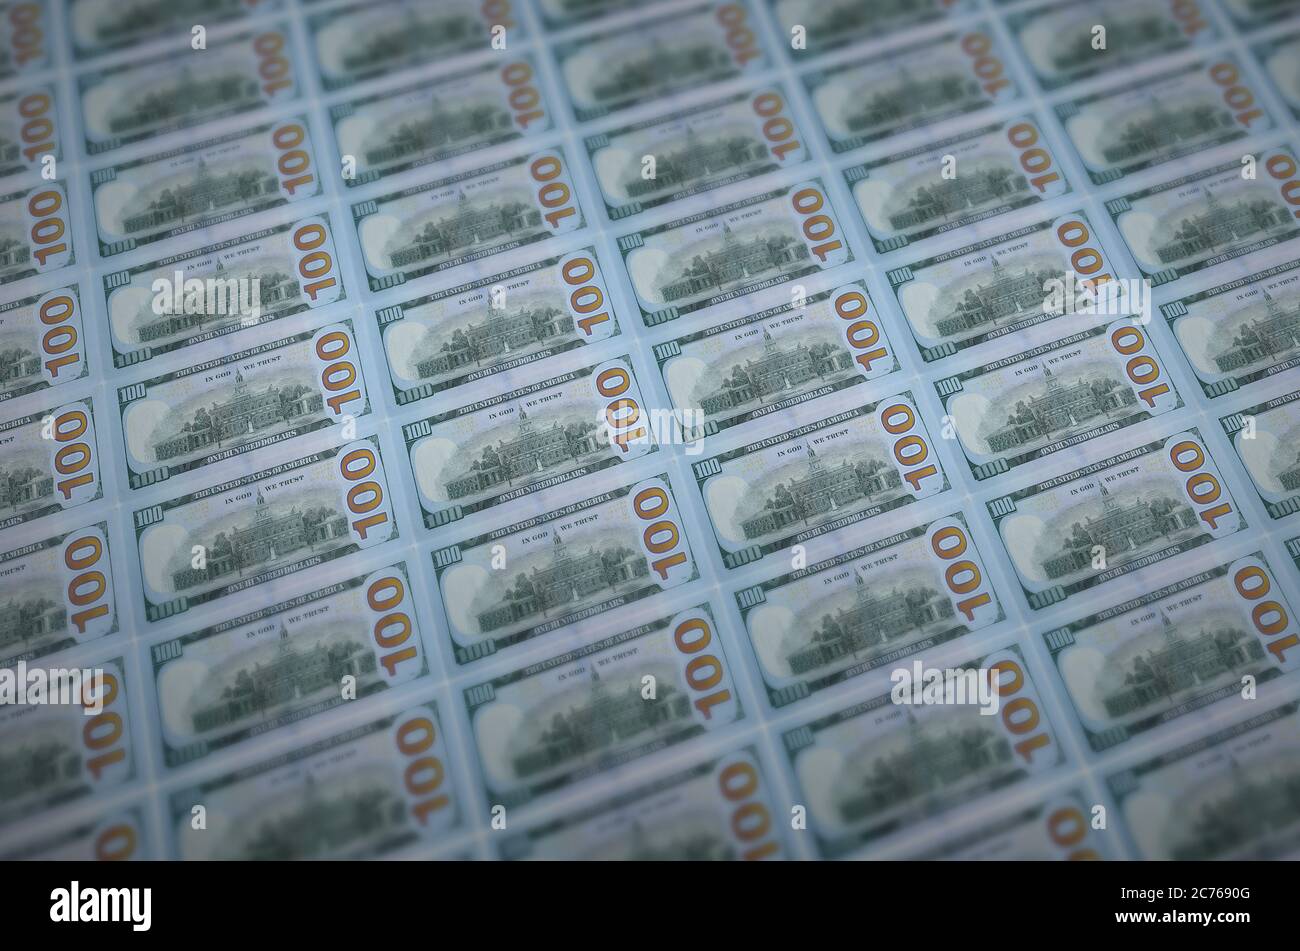 100 Billion Dollar High Resolution Stock Photography And Images Alamy